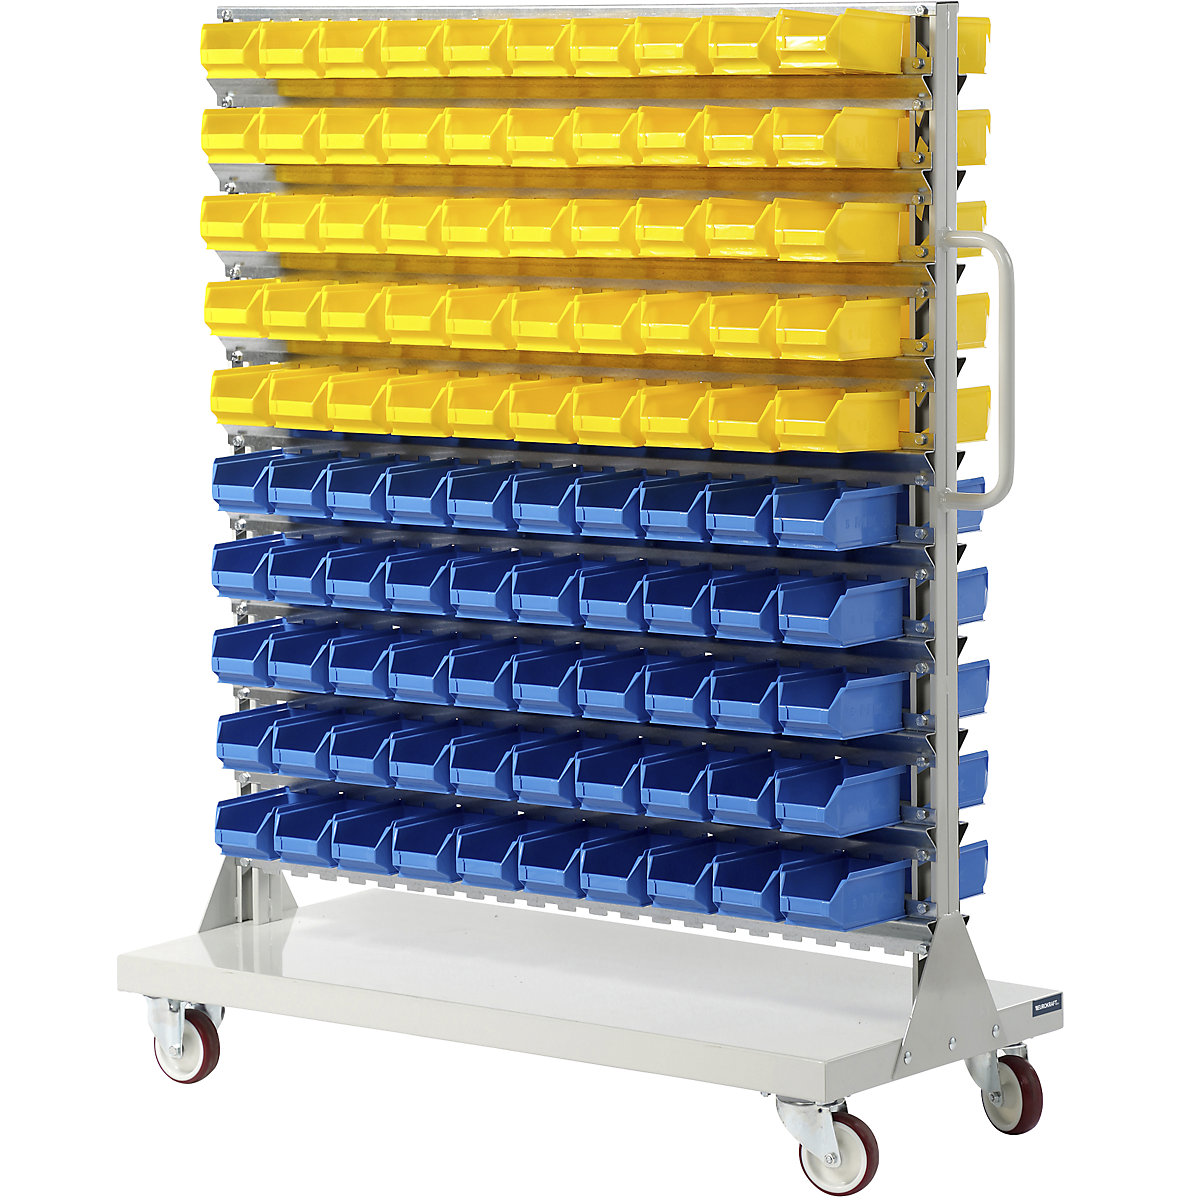 Mobile rack with open fronted storage bins – eurokraft pro, double sided, HxWxD 1450 x 1170 x 540 mm, with 210 bins-4